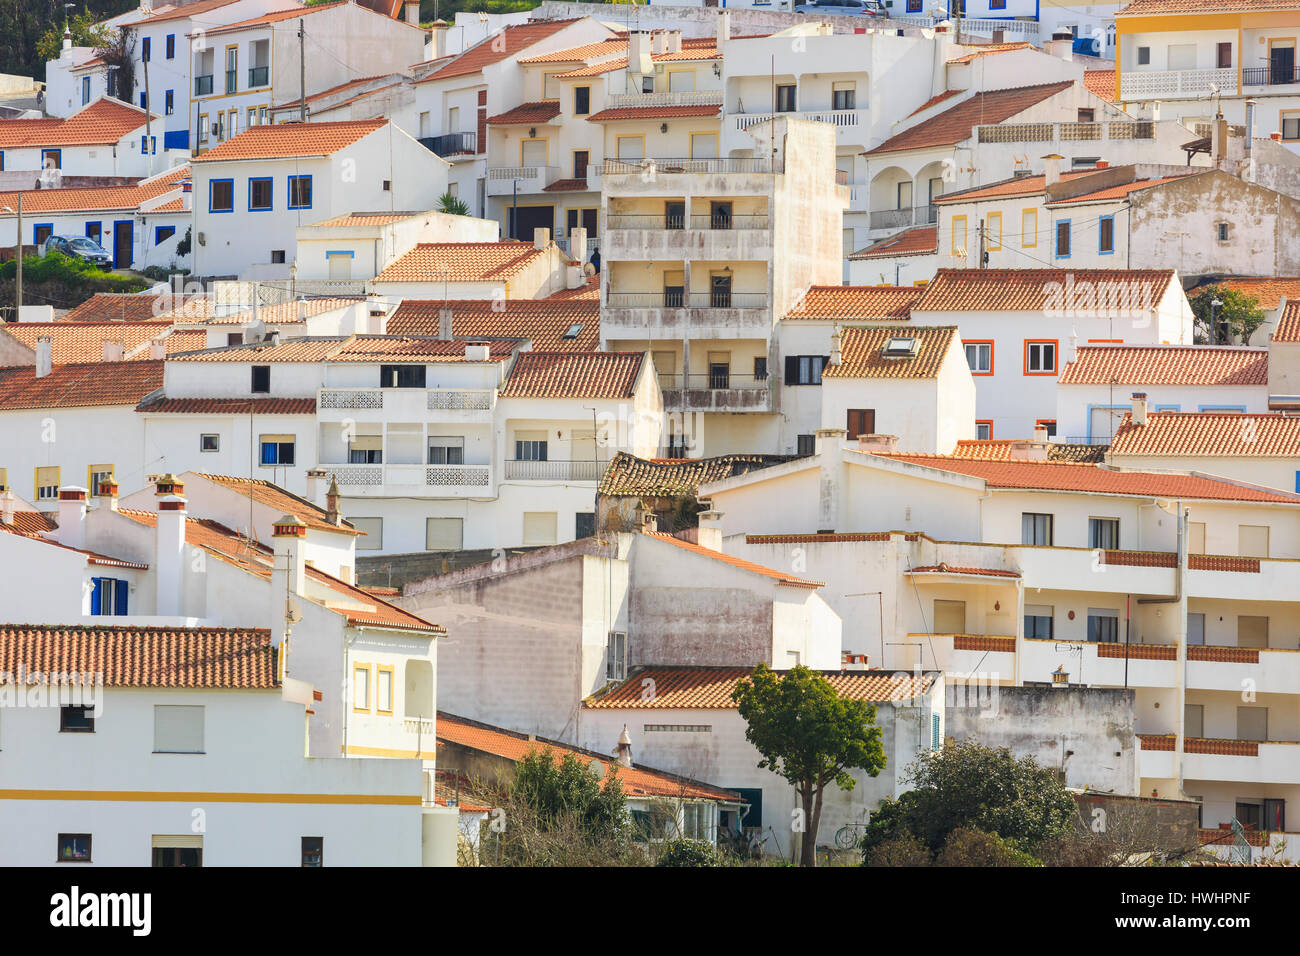 Odeceixe, Algarve, Portugal, a small village on the Atlantic coast and part of the Rota Vicentina. Stock Photo